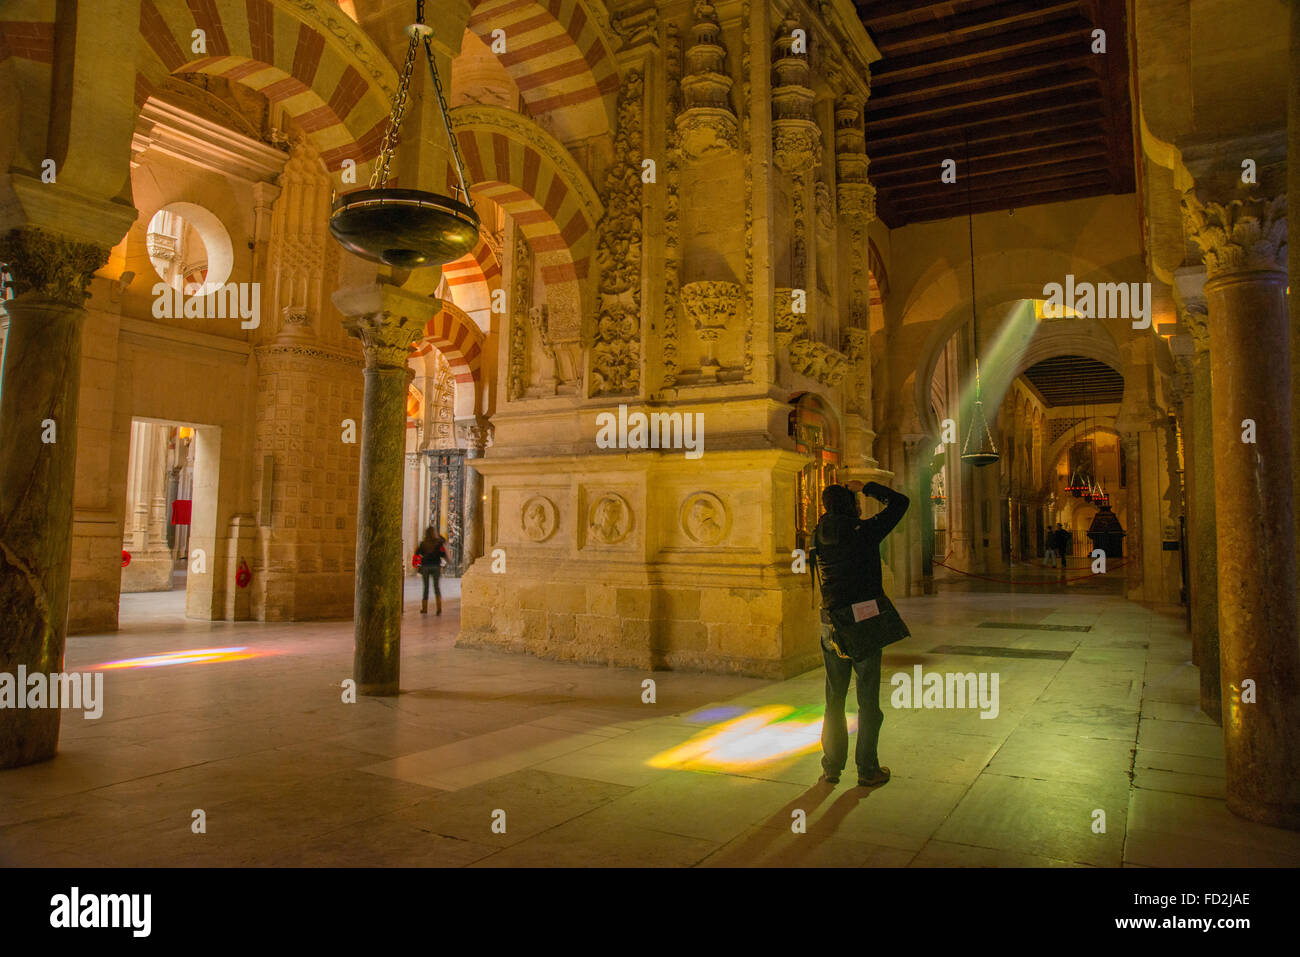 Mosque-Cathedral, indoor view. Cordoba, Spain. Stock Photo